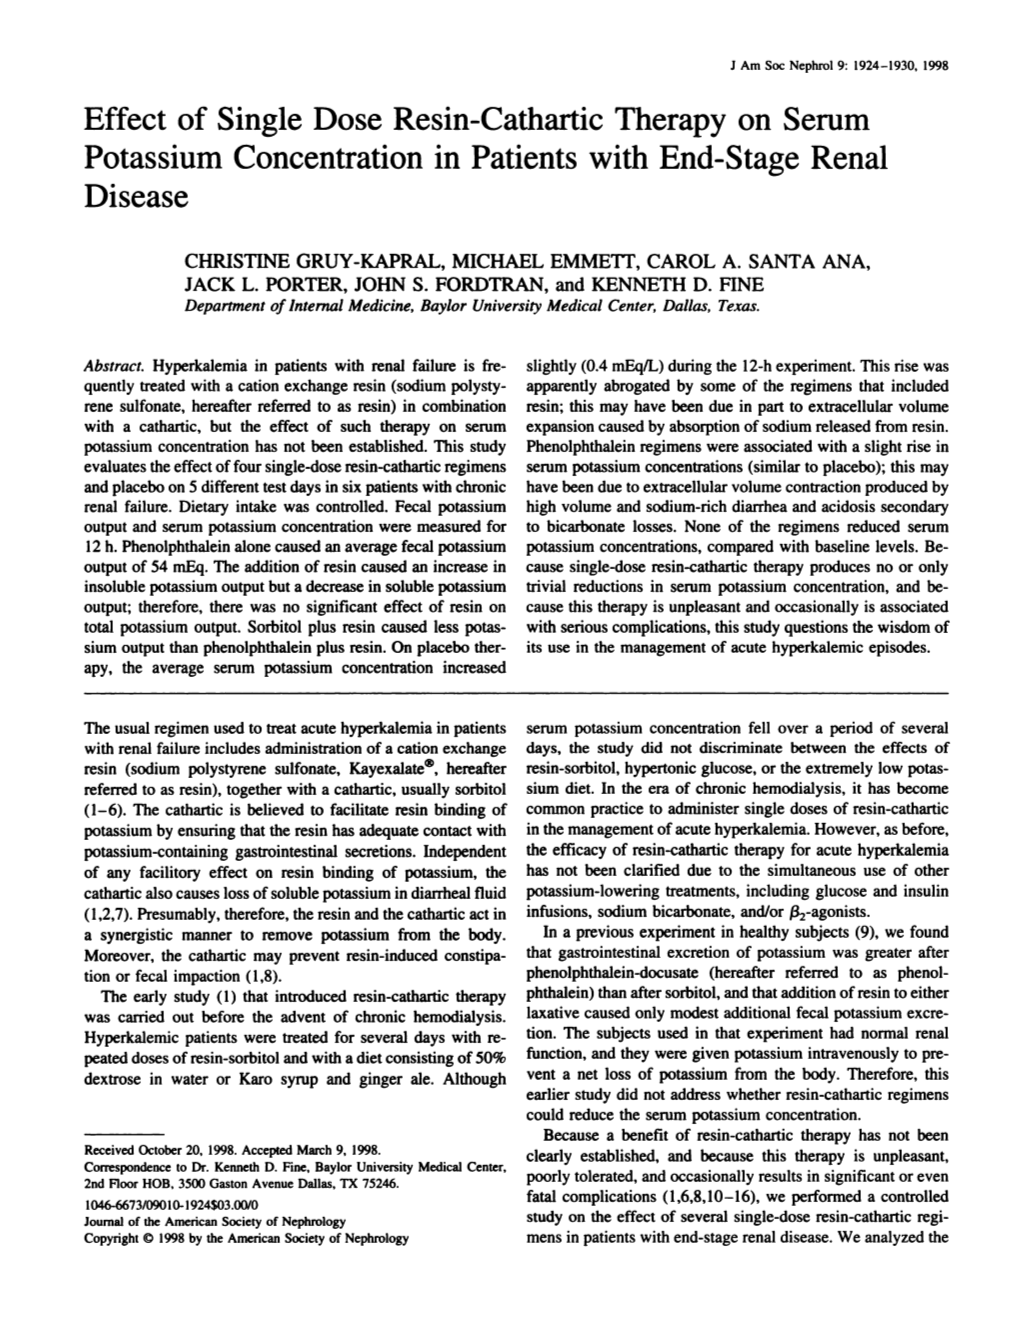 Effect of Single Dose Resin-Cathartic Therapy on Serum Potassium Concentration in Patients with End-Stage Renal Disease